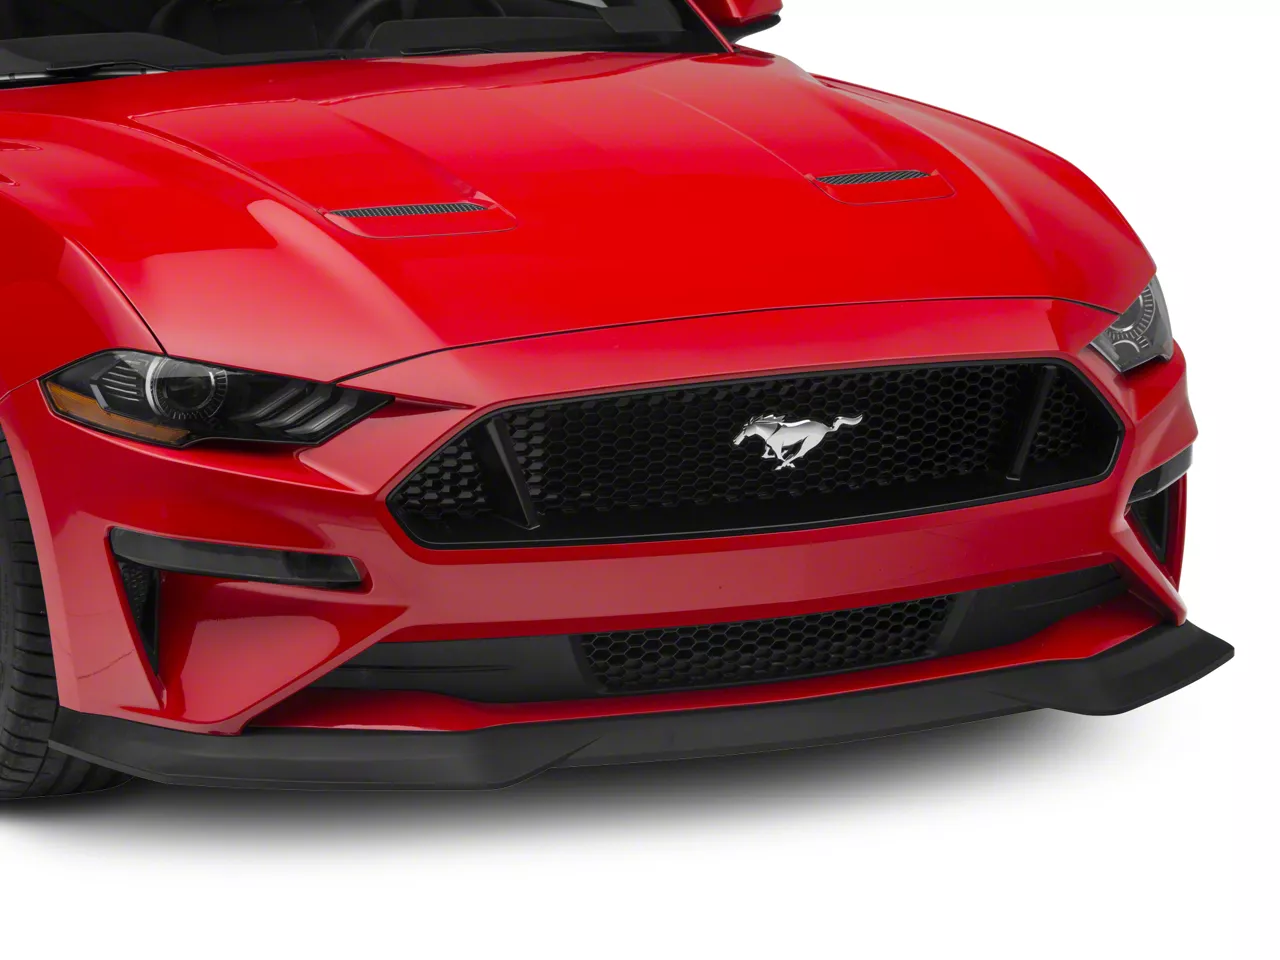 RTR Mustang Chin Spoiler 403277 (18-23 Mustang GT, EcoBoost) - Free Shipping